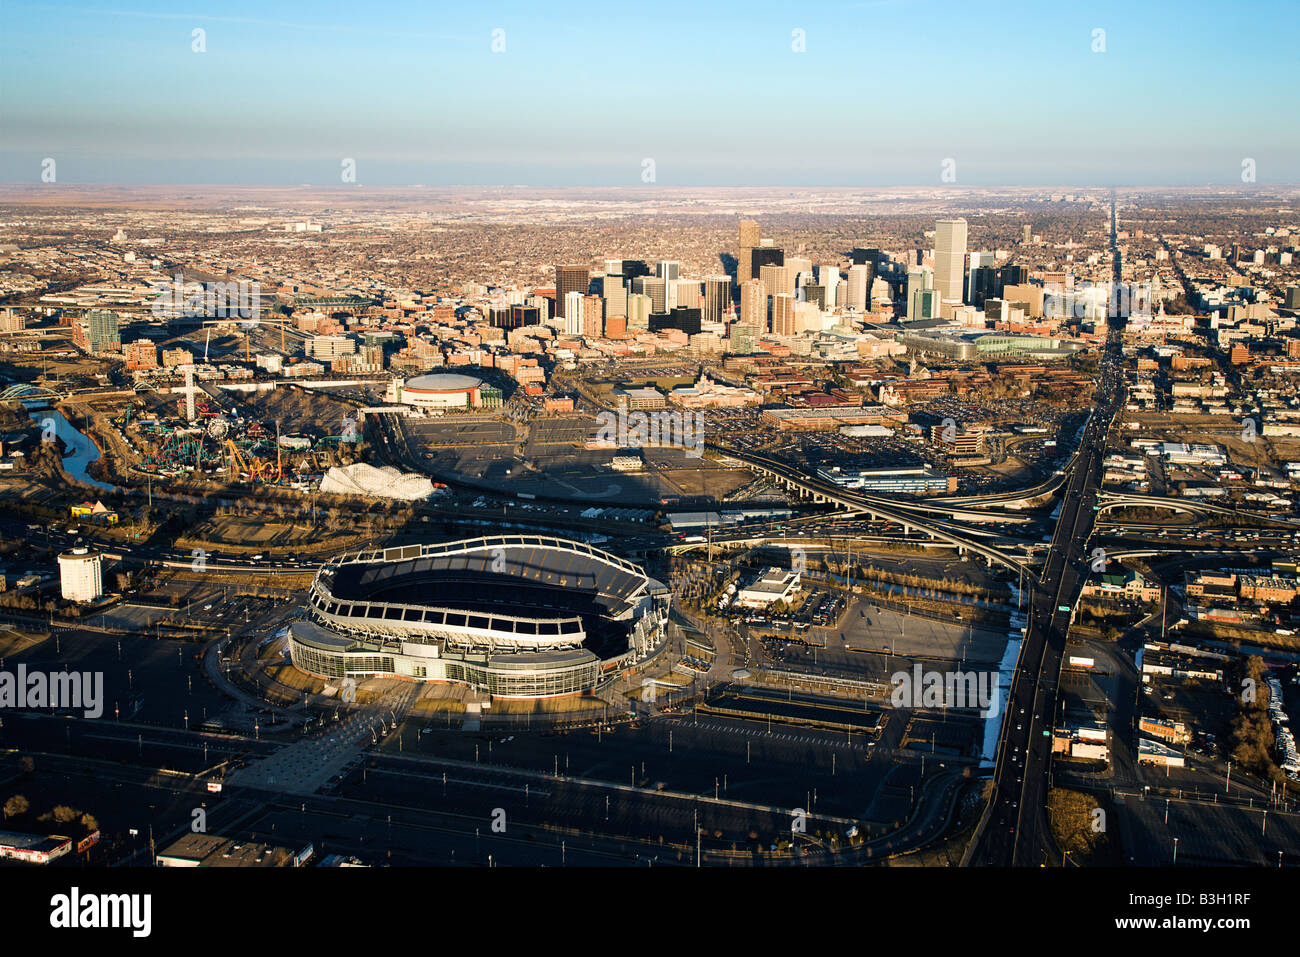 Aerial cityscape of urban Denver Colorado with Mile High stadium in foreground Stock Photo